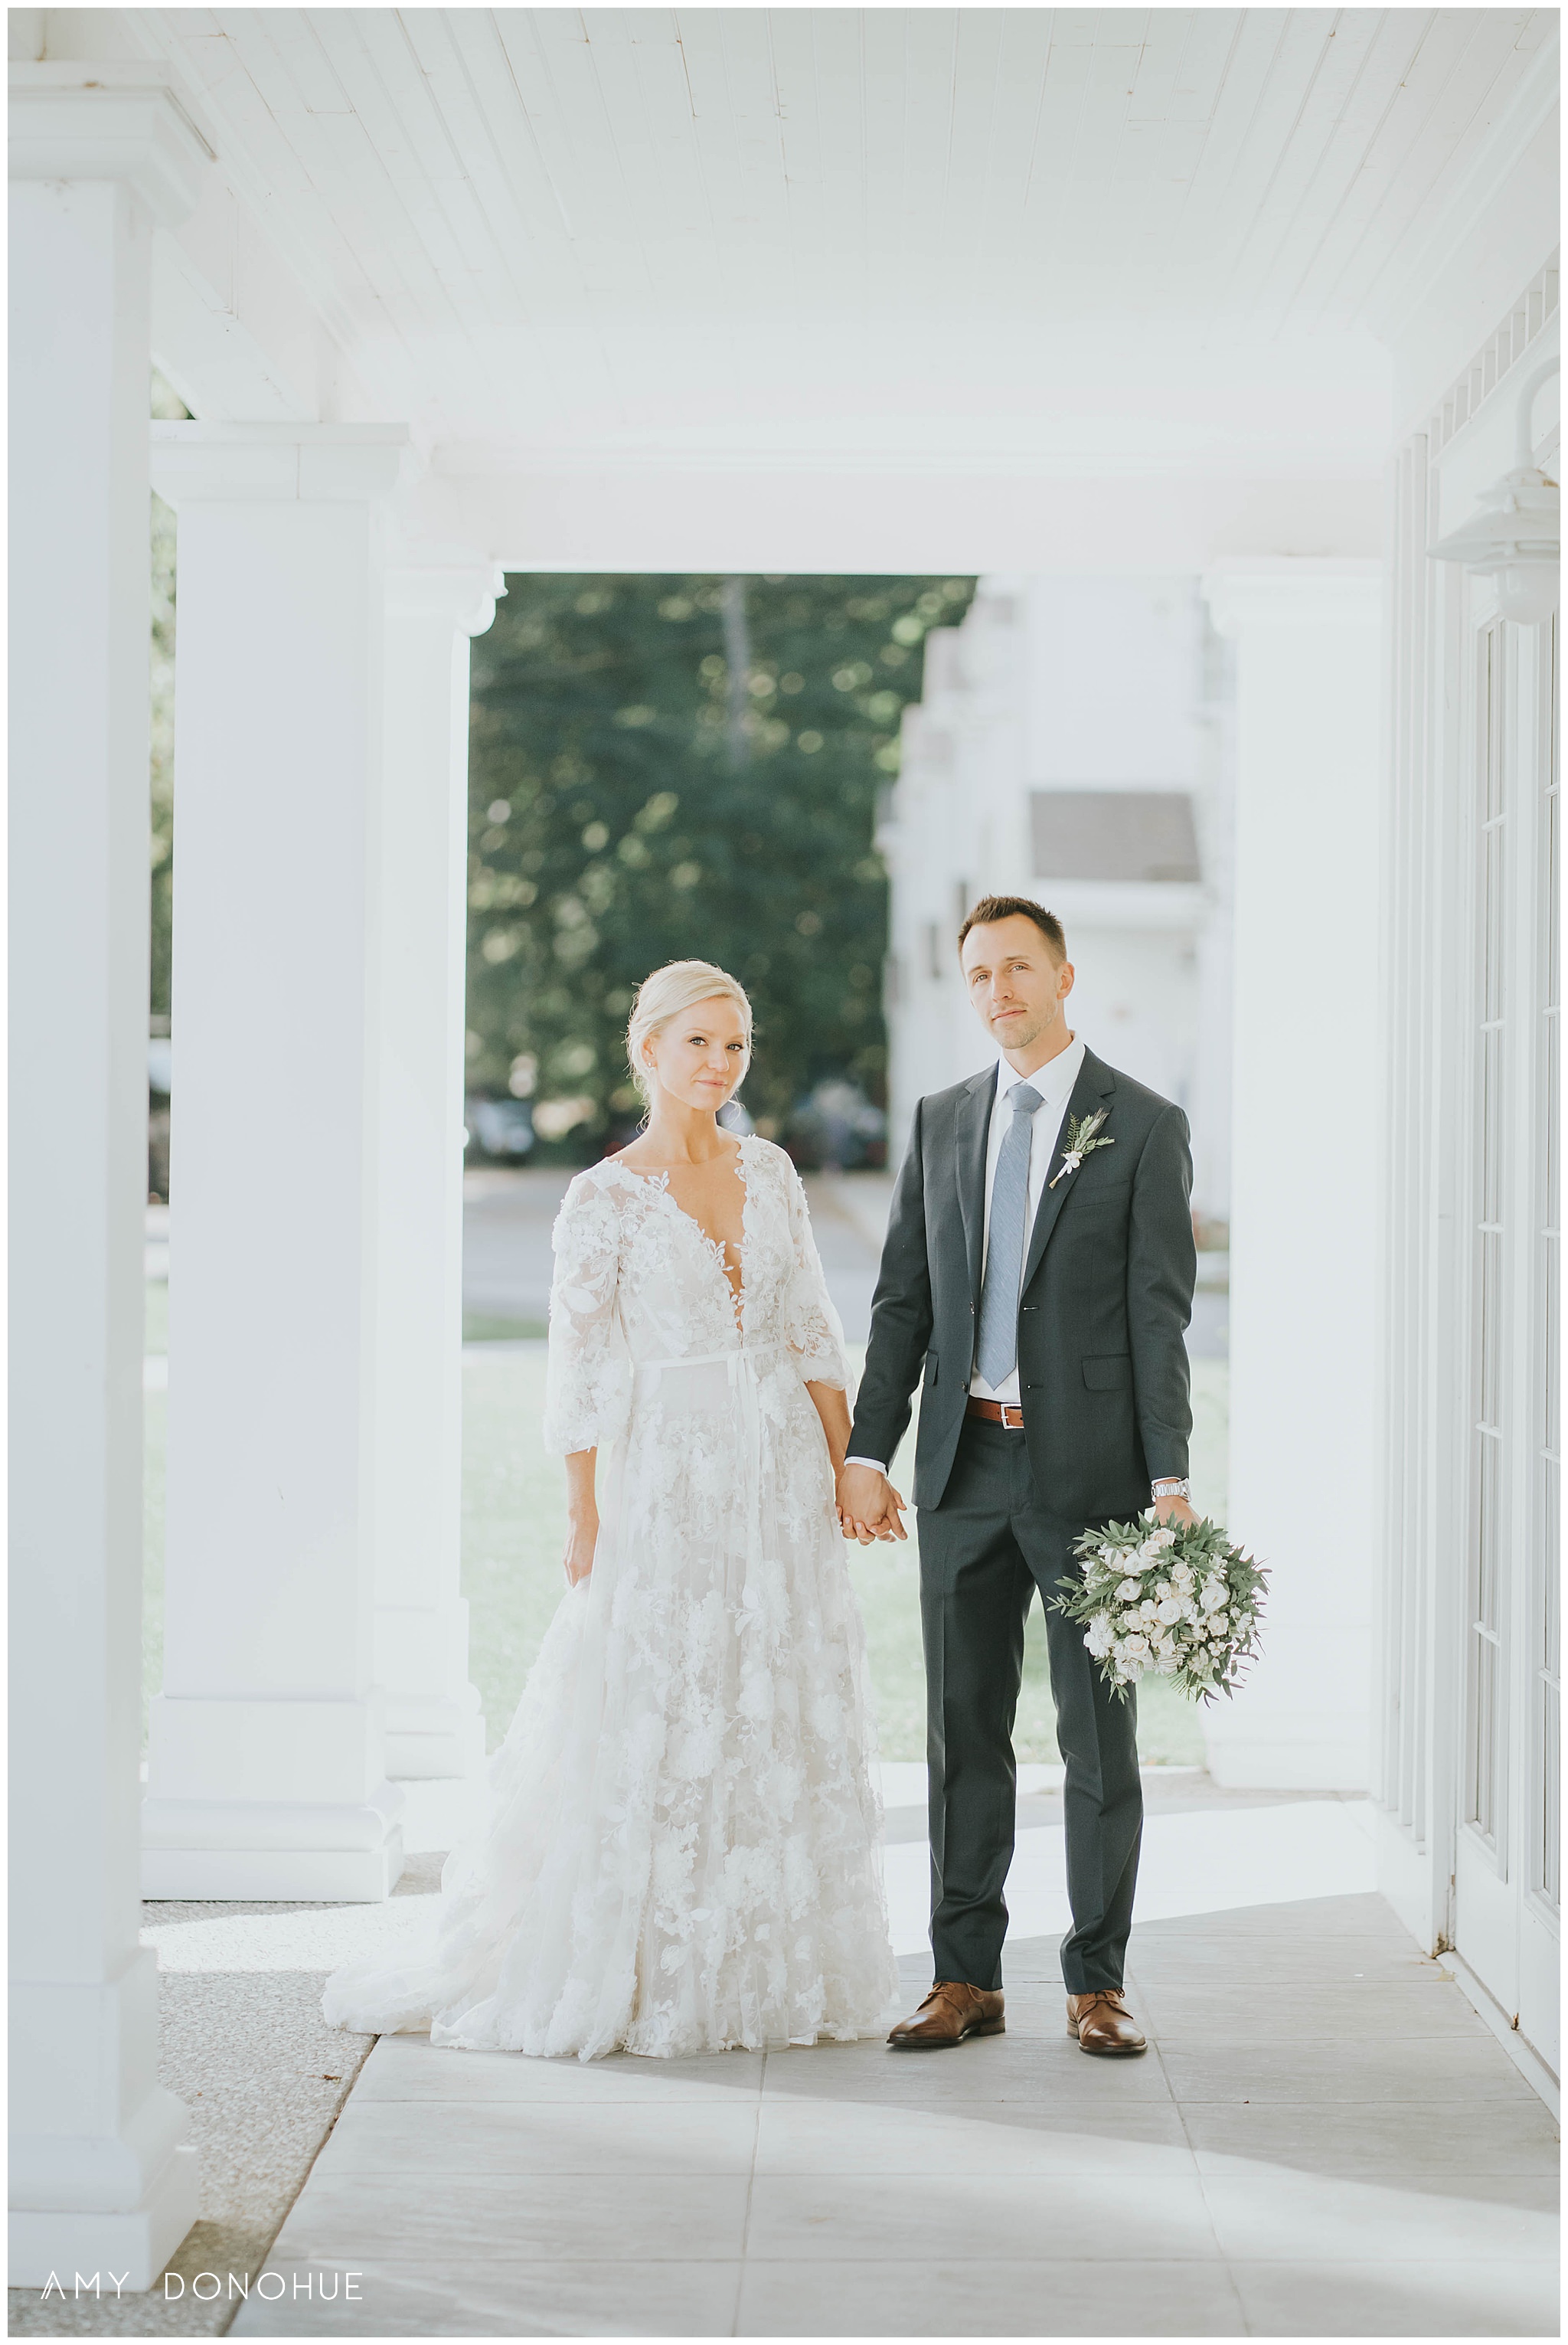 Bride and groom portraits at the Equinox Resort Wedding | Vermont Wedding Photographer | © Amy Donohue Photography